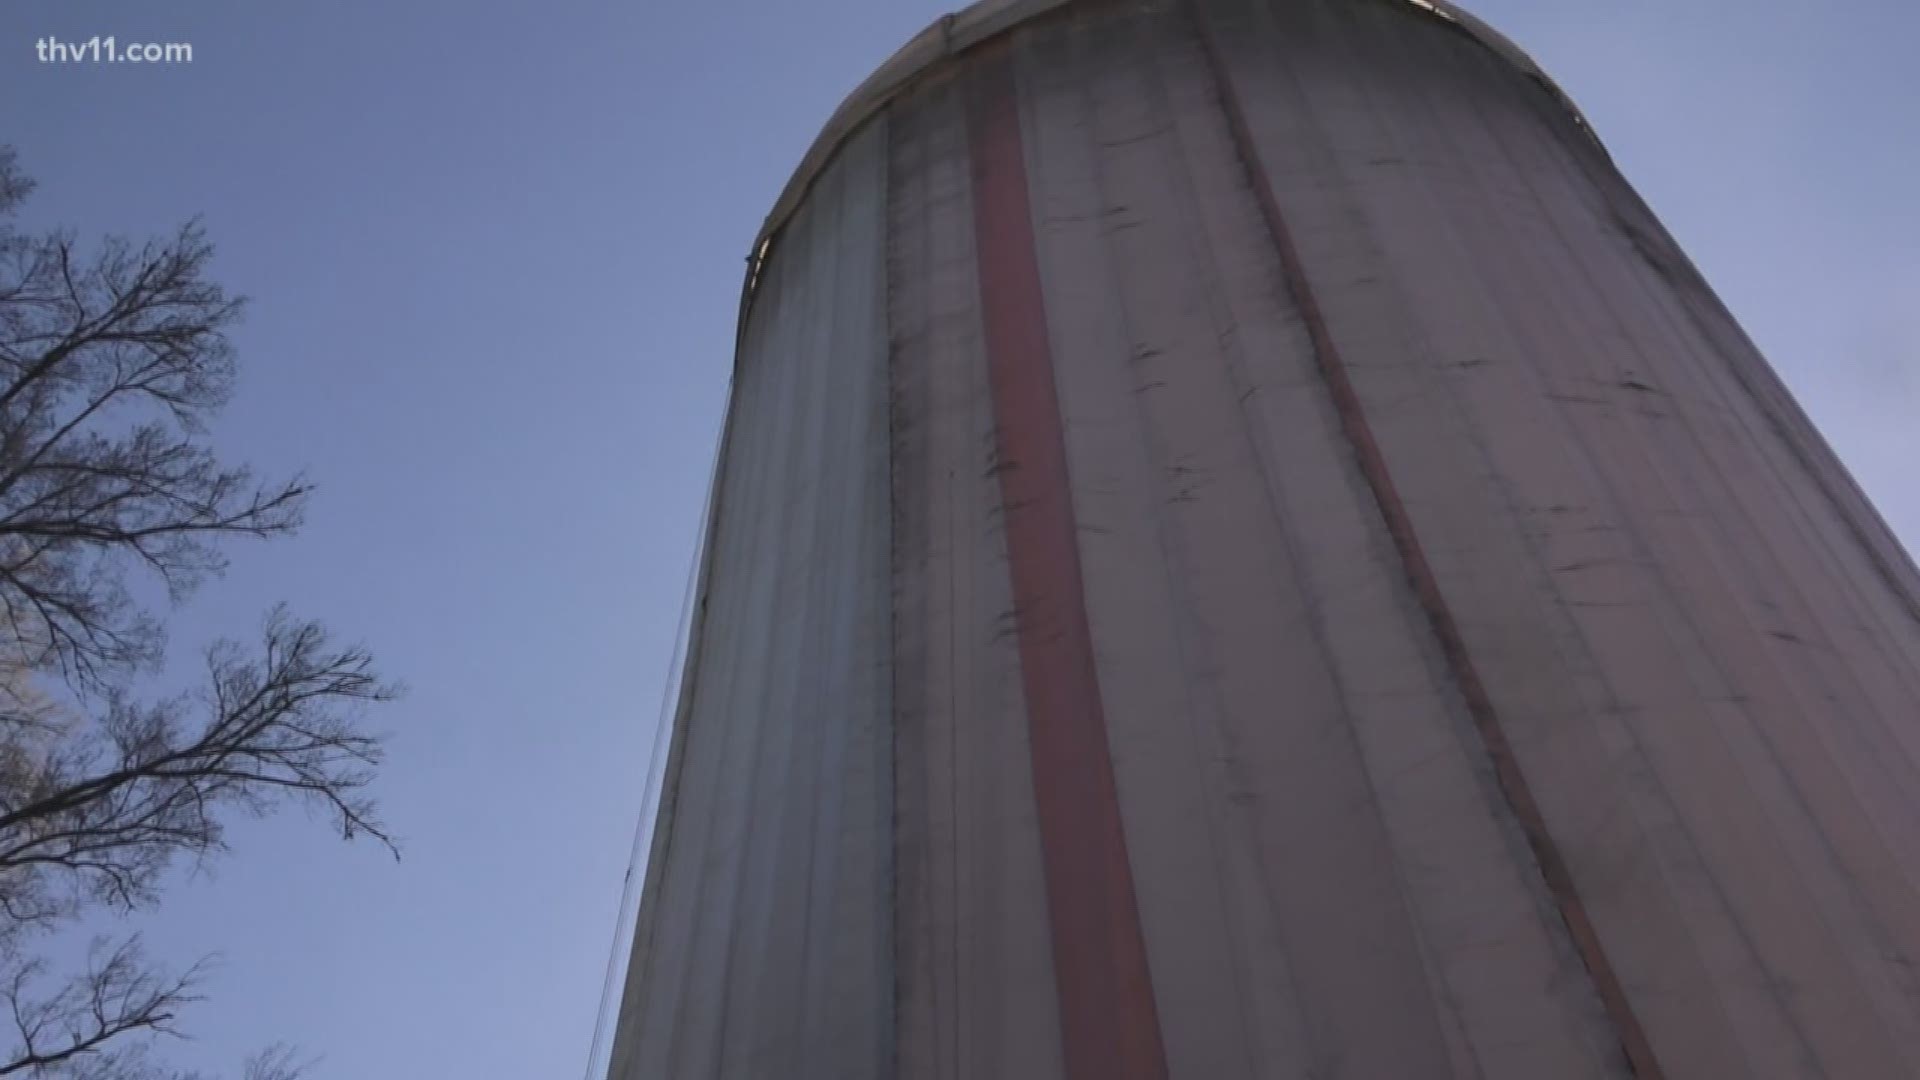 For years, the water tank known as the "Texas-McHenry" tower has been a town staple. But, the only reason it stands out is because of its plain, and what some call boring, structure.